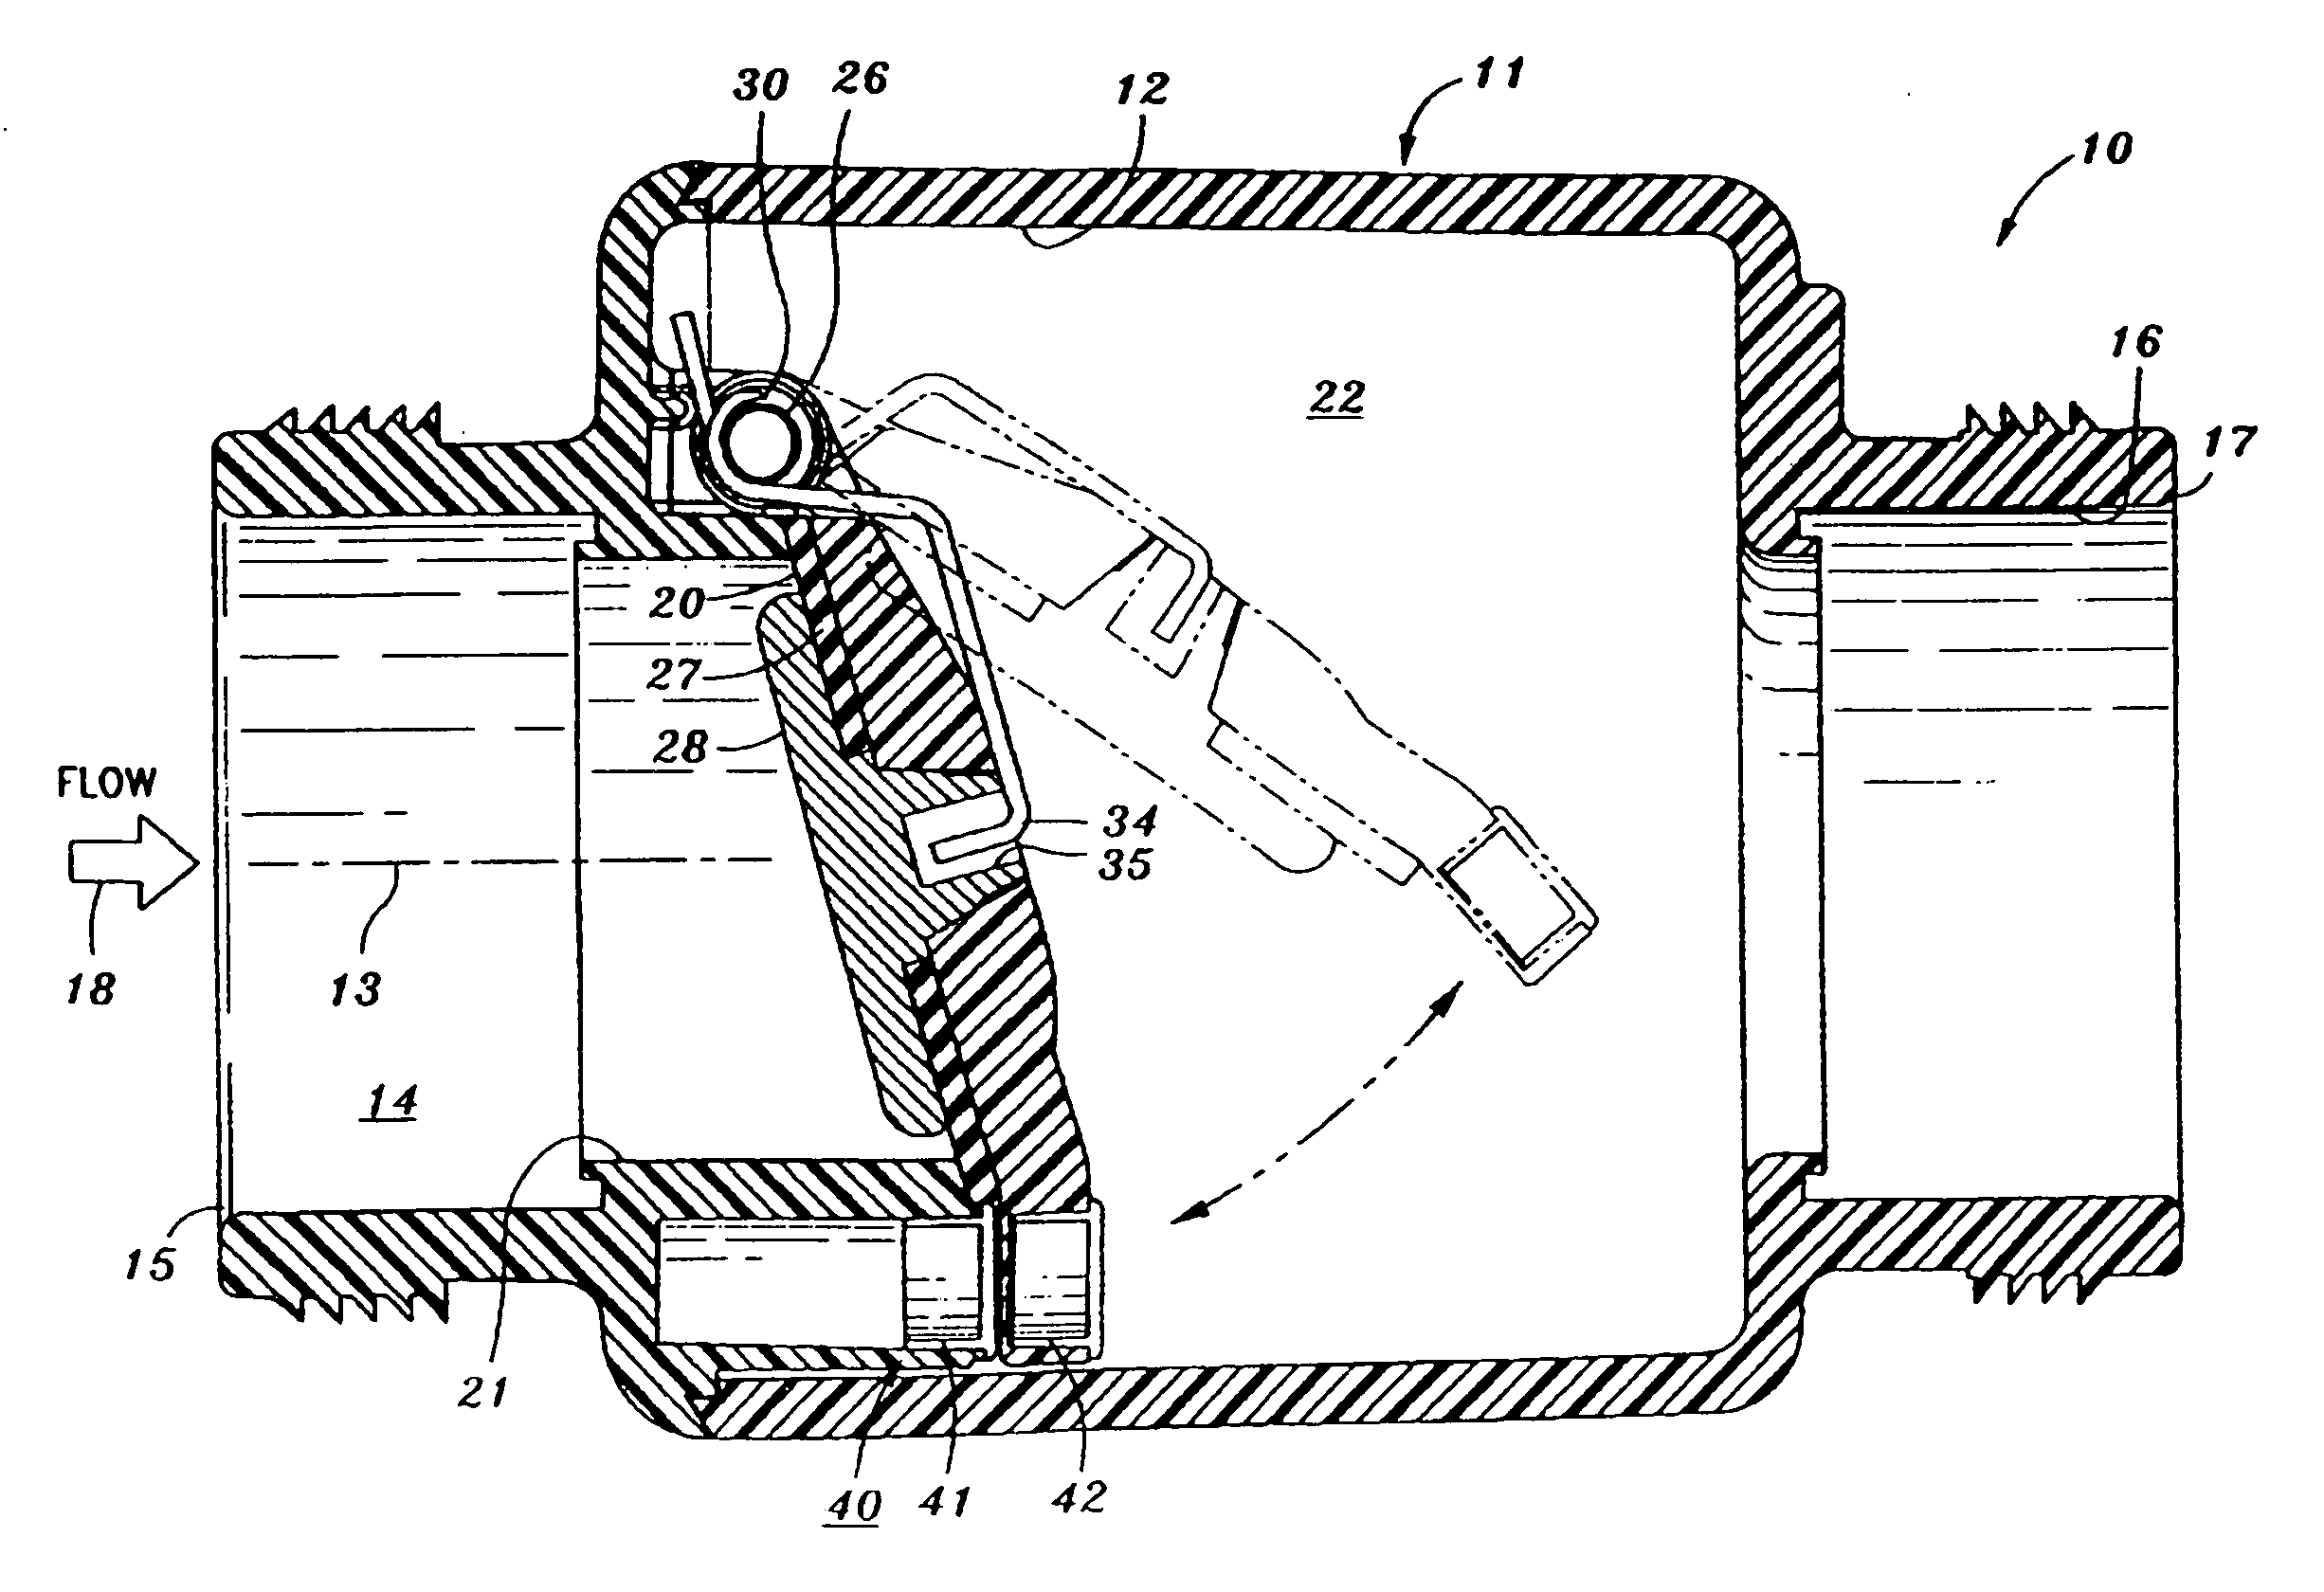 Quickly opening hinged check valve with pre-determined upstream pressure required to open